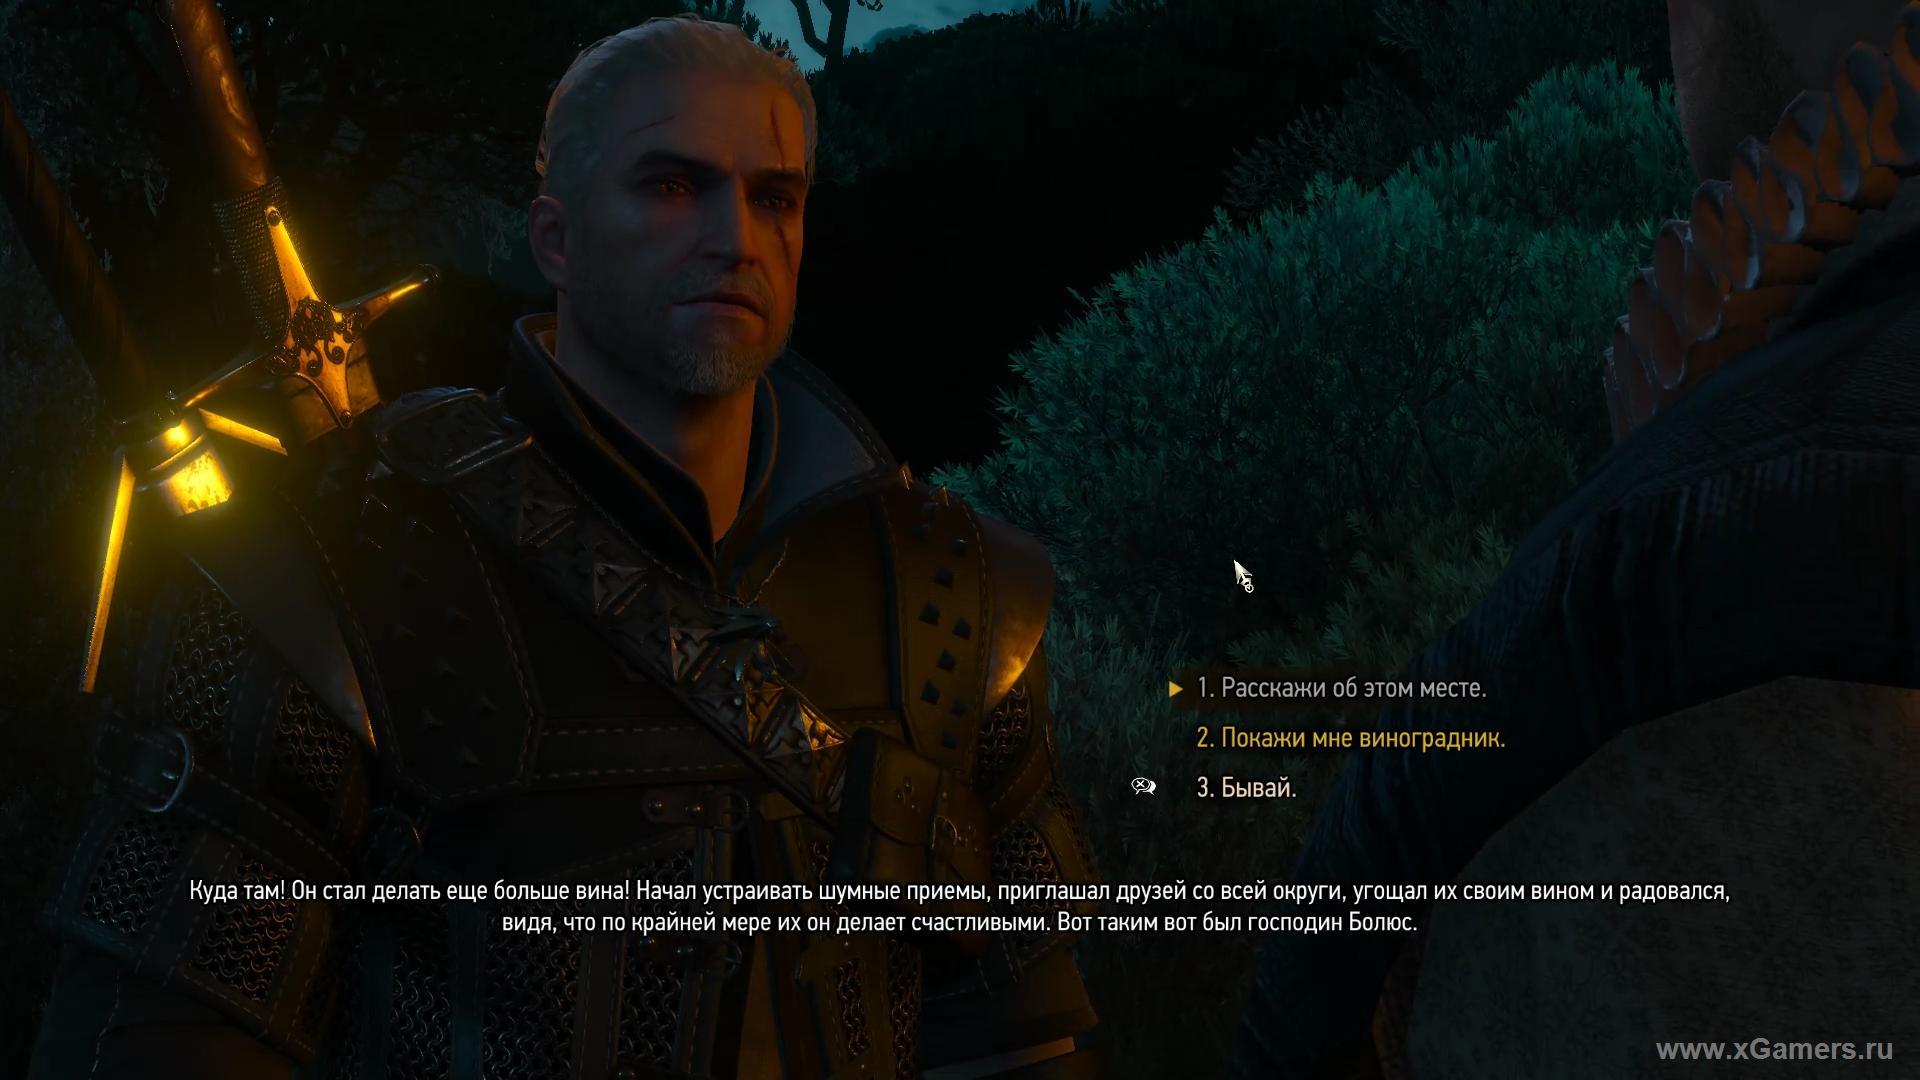 The Witcher Corvo Bianco: Review, and